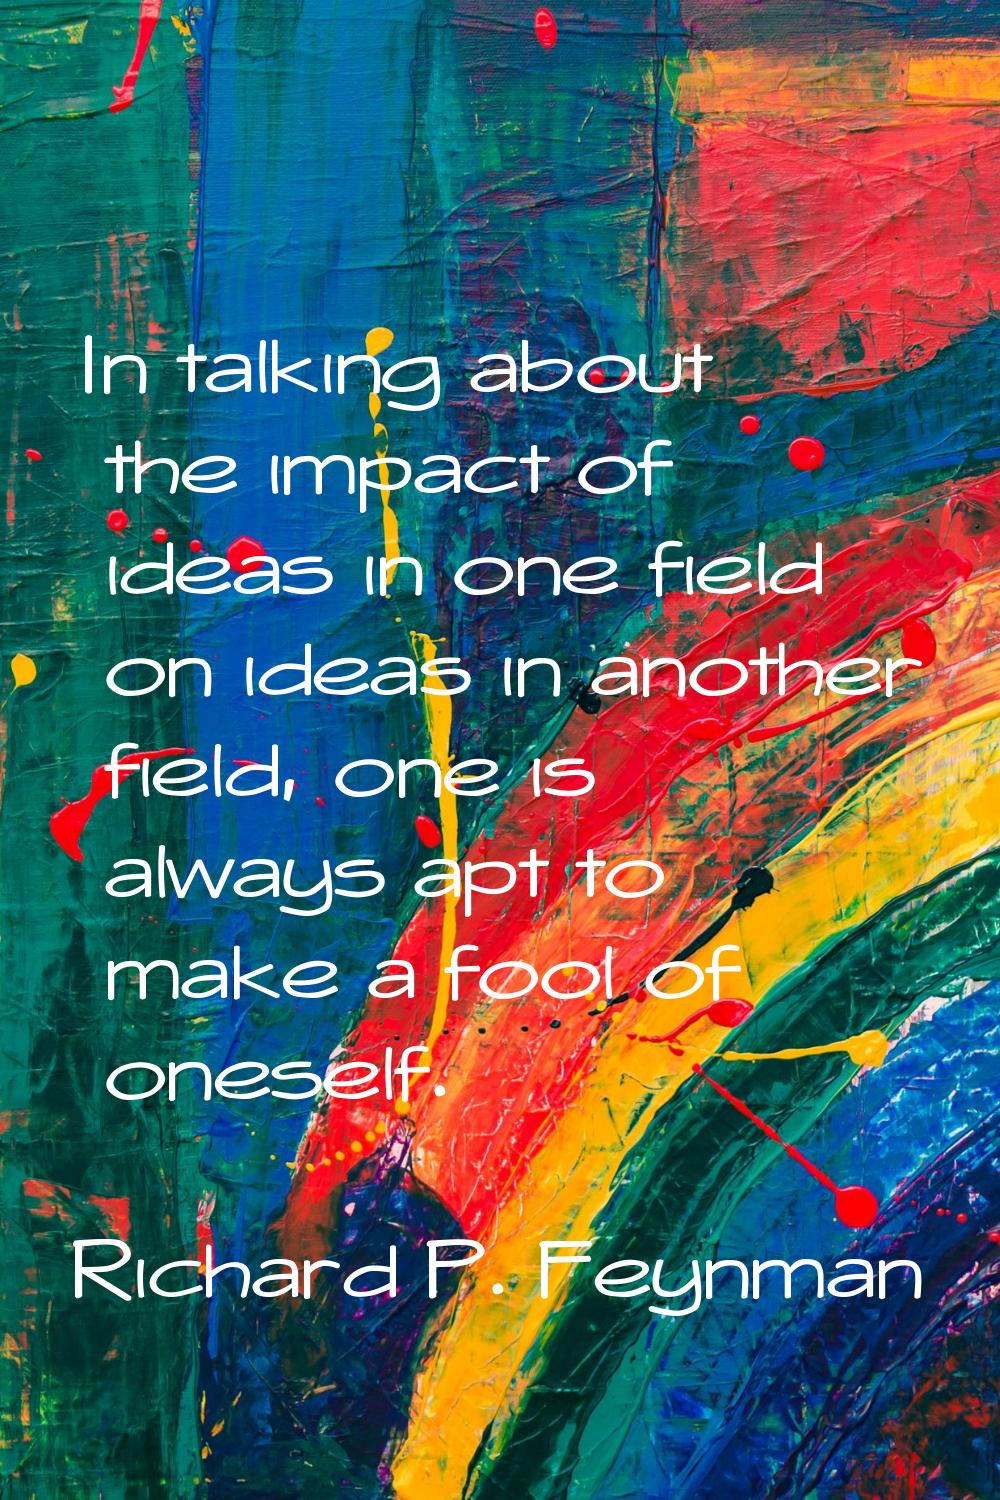 In talking about the impact of ideas in one field on ideas in another field, one is always apt to m